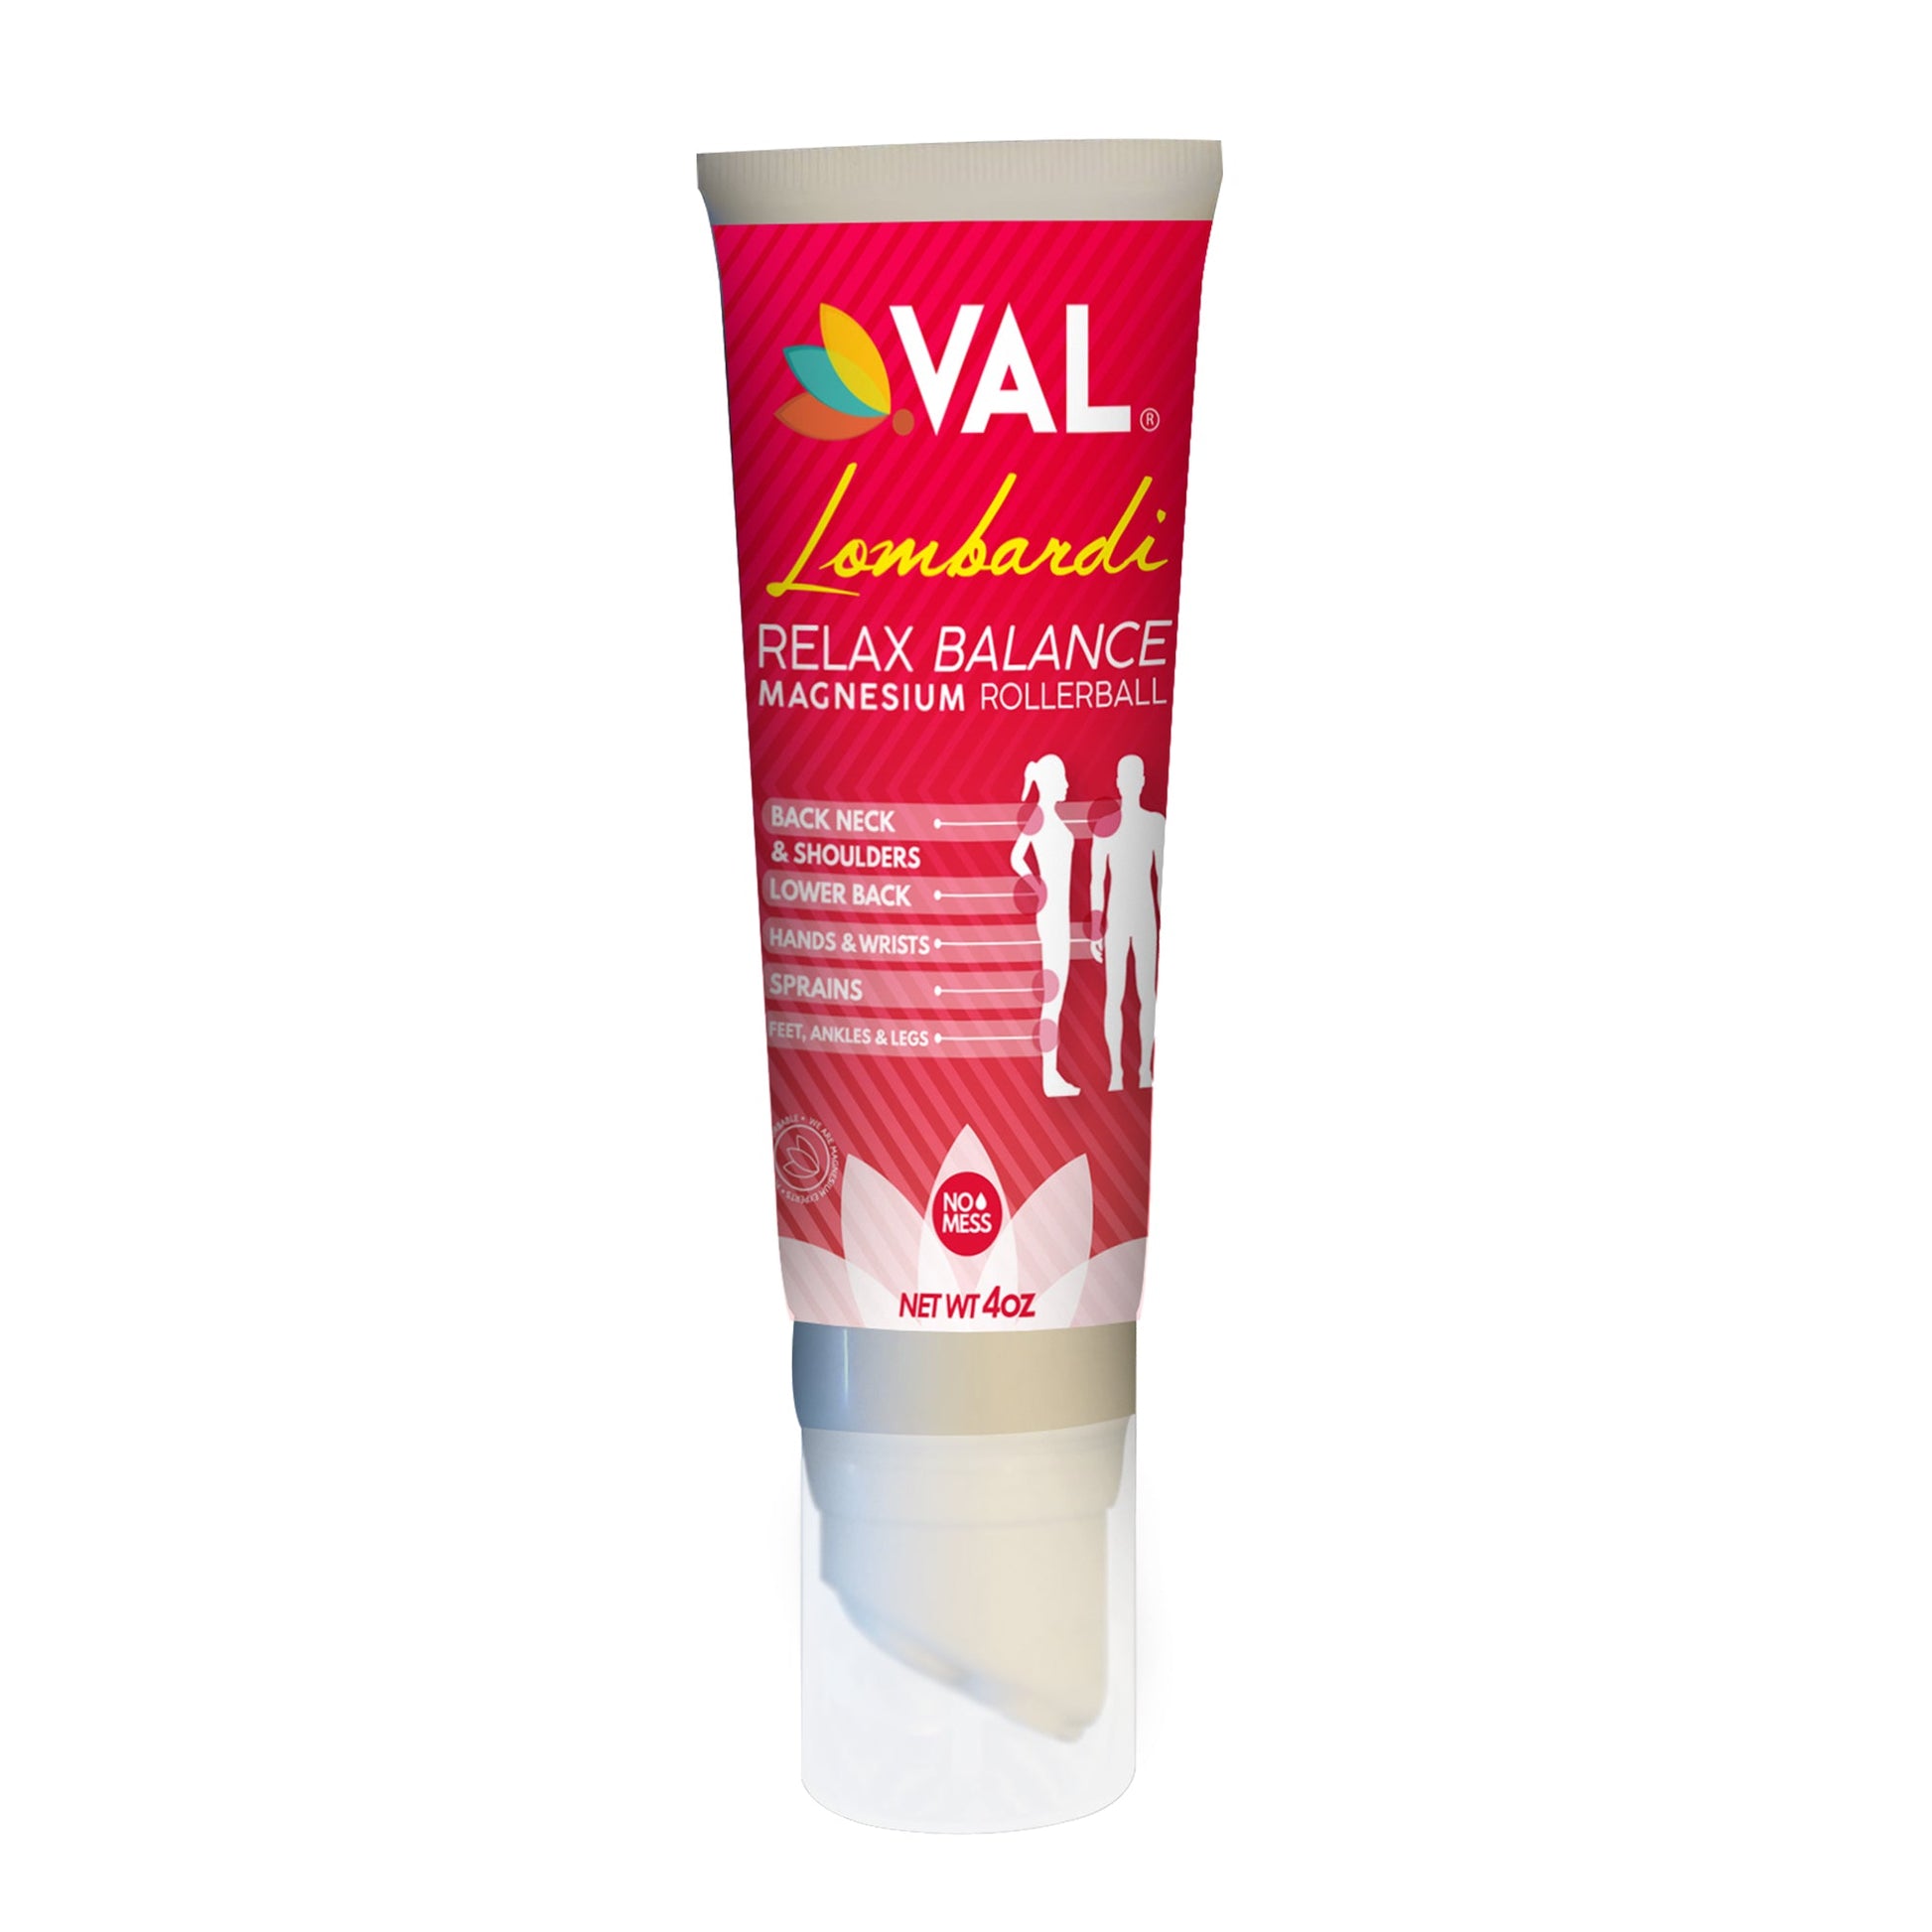 VAL Lombardi Magnesium Rollerball - Deep Pressure Massage Applicator with Cool-to-The-Touch Stainless Steel Rollerballs - 4oz - Val Supplements